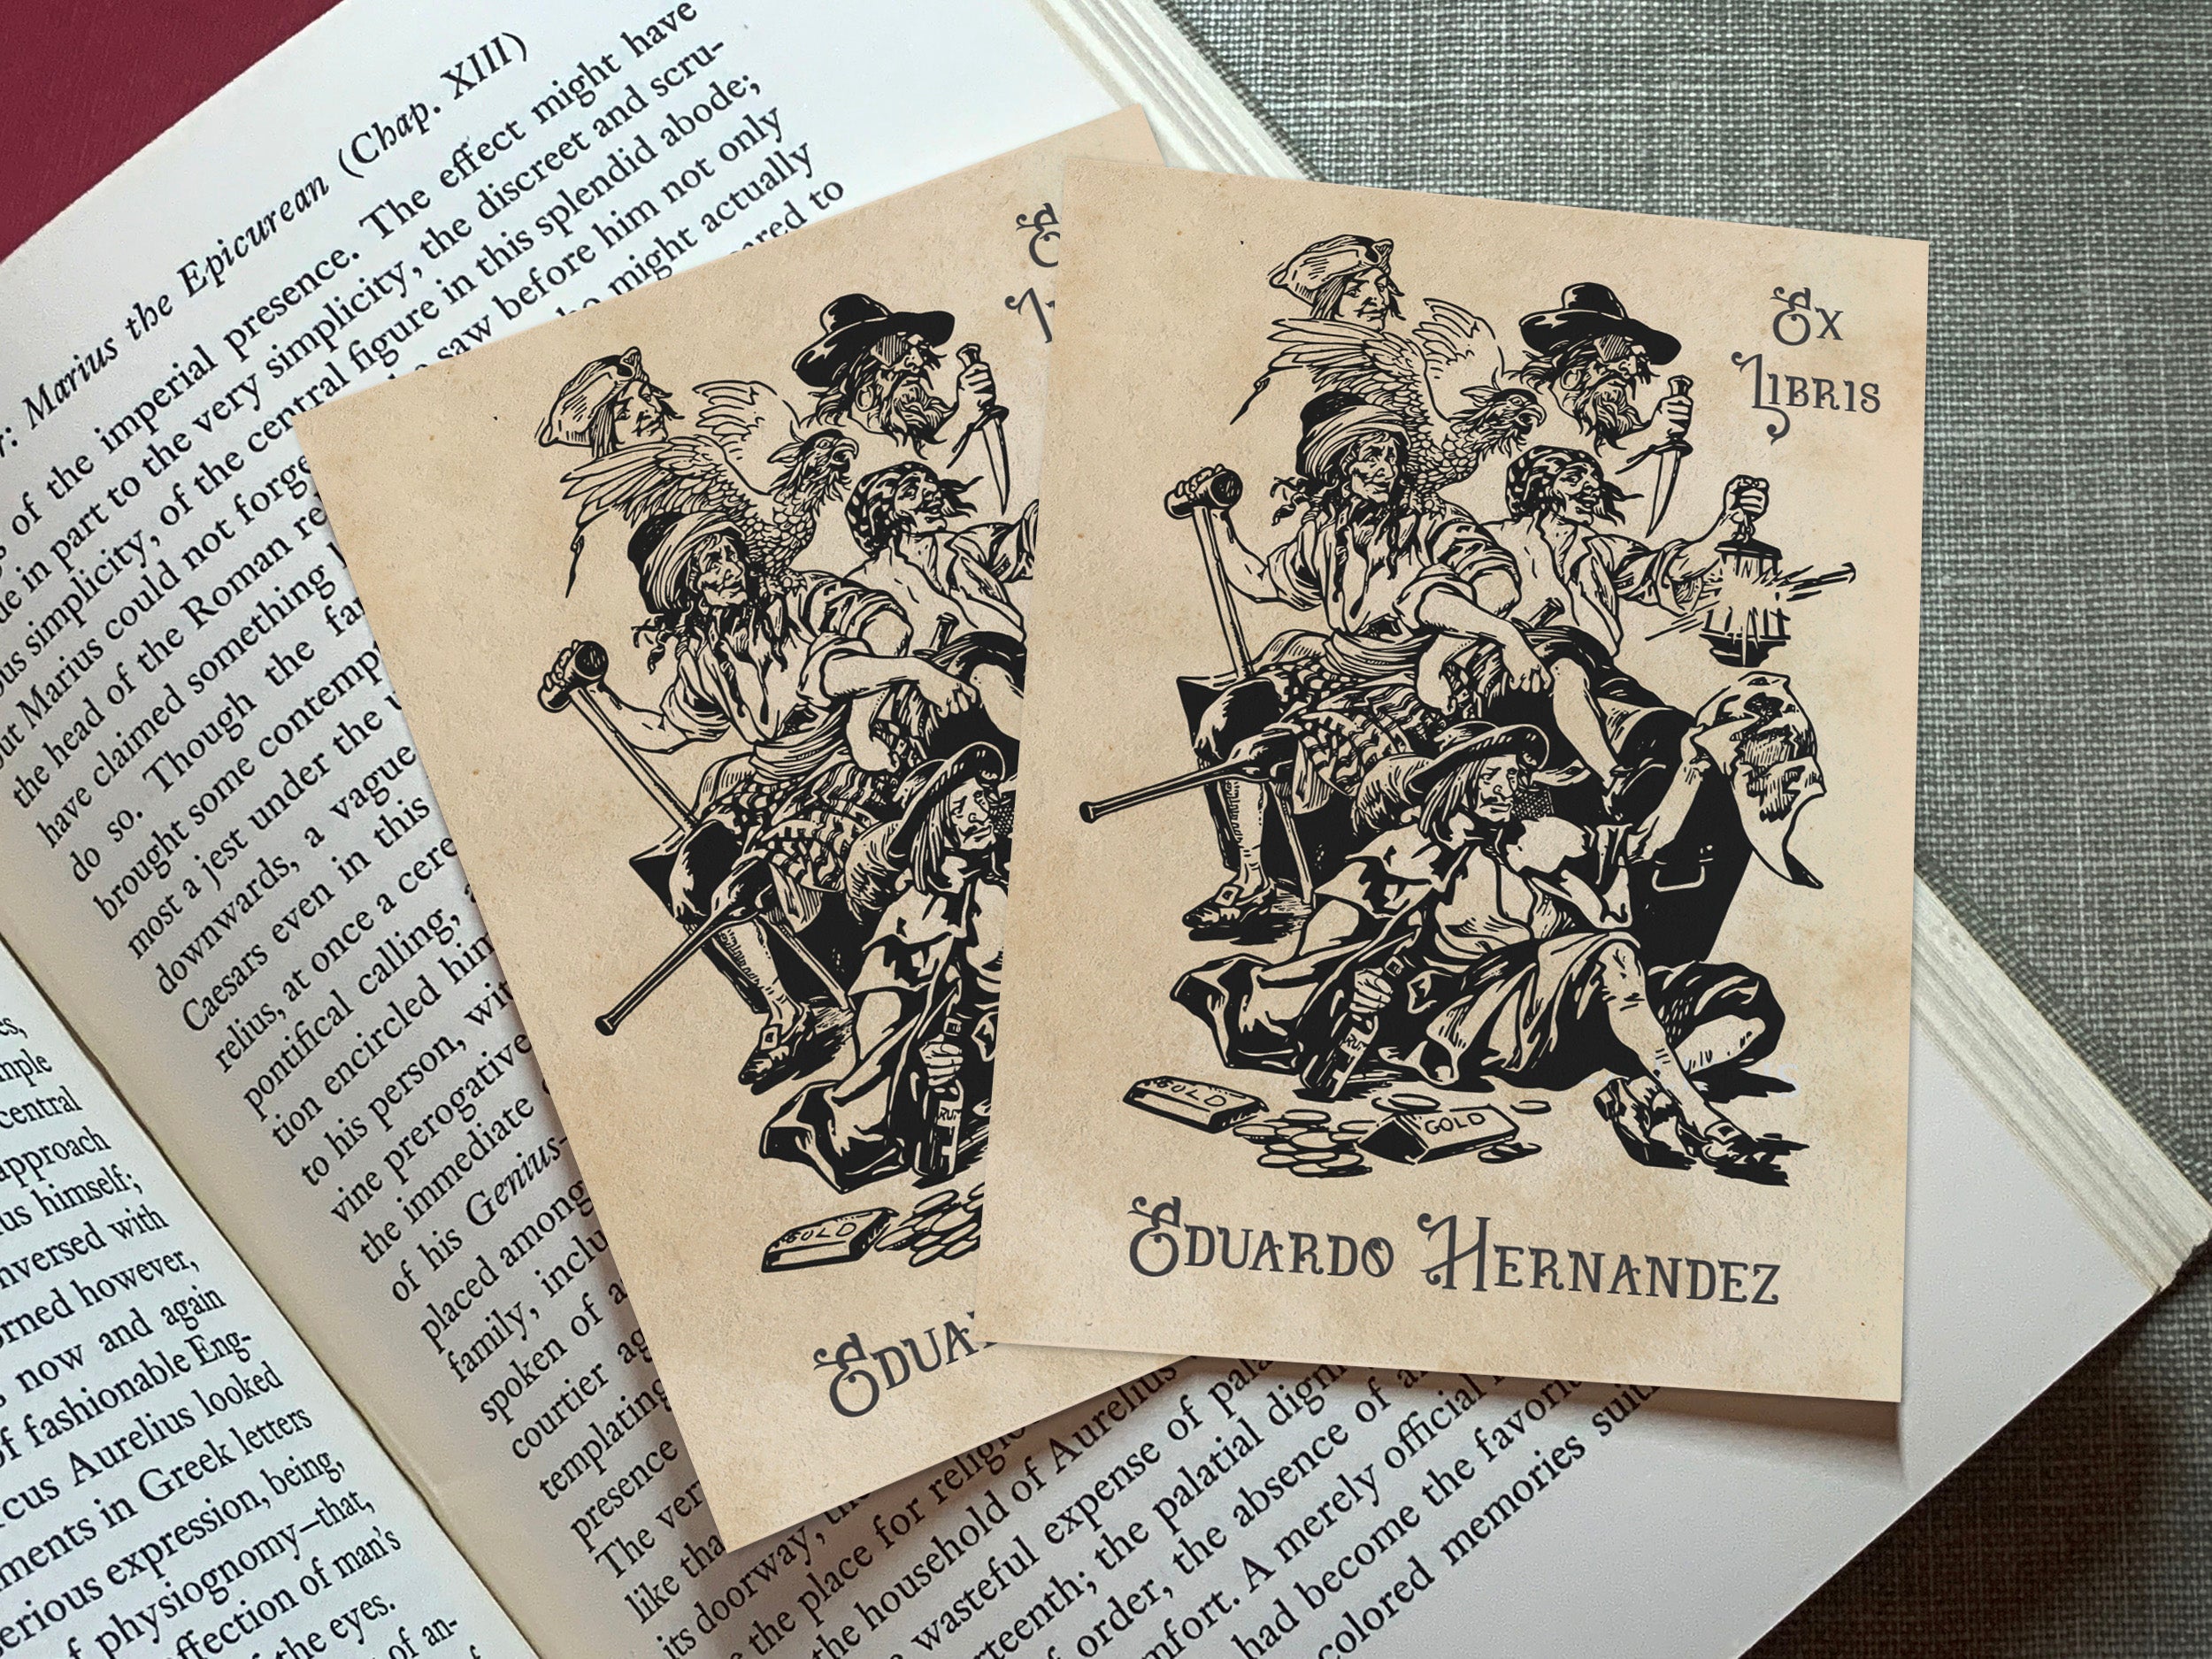 Treasure Island Buccaneers, Personalized Pirate Ex-Libris Bookplates, Crafted on Traditional Gummed Paper, 3in x 4in, Set of 30